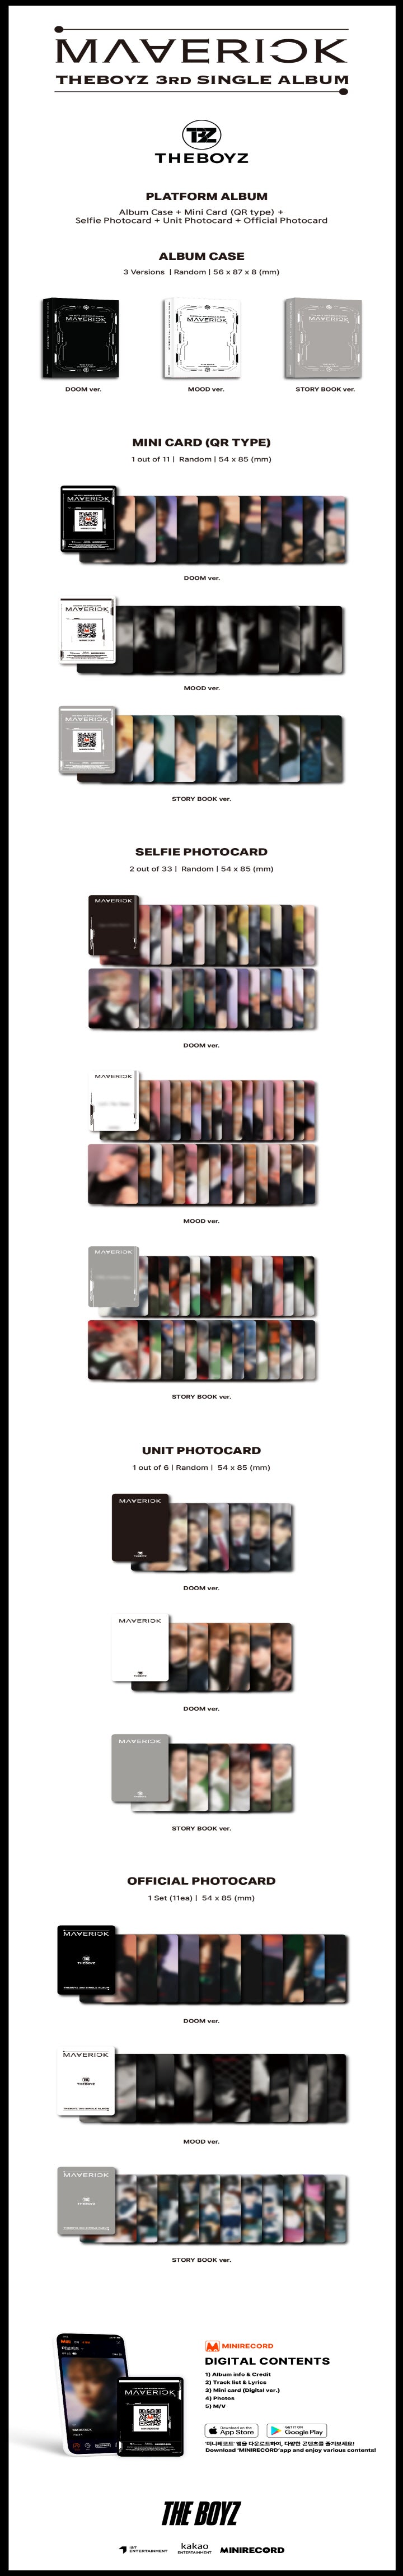 1 Mini Card (QR Type, random out of 11 types)
2 Selfie Photo Card (random out of 33types)
1 Unit Photo Card (random out of...